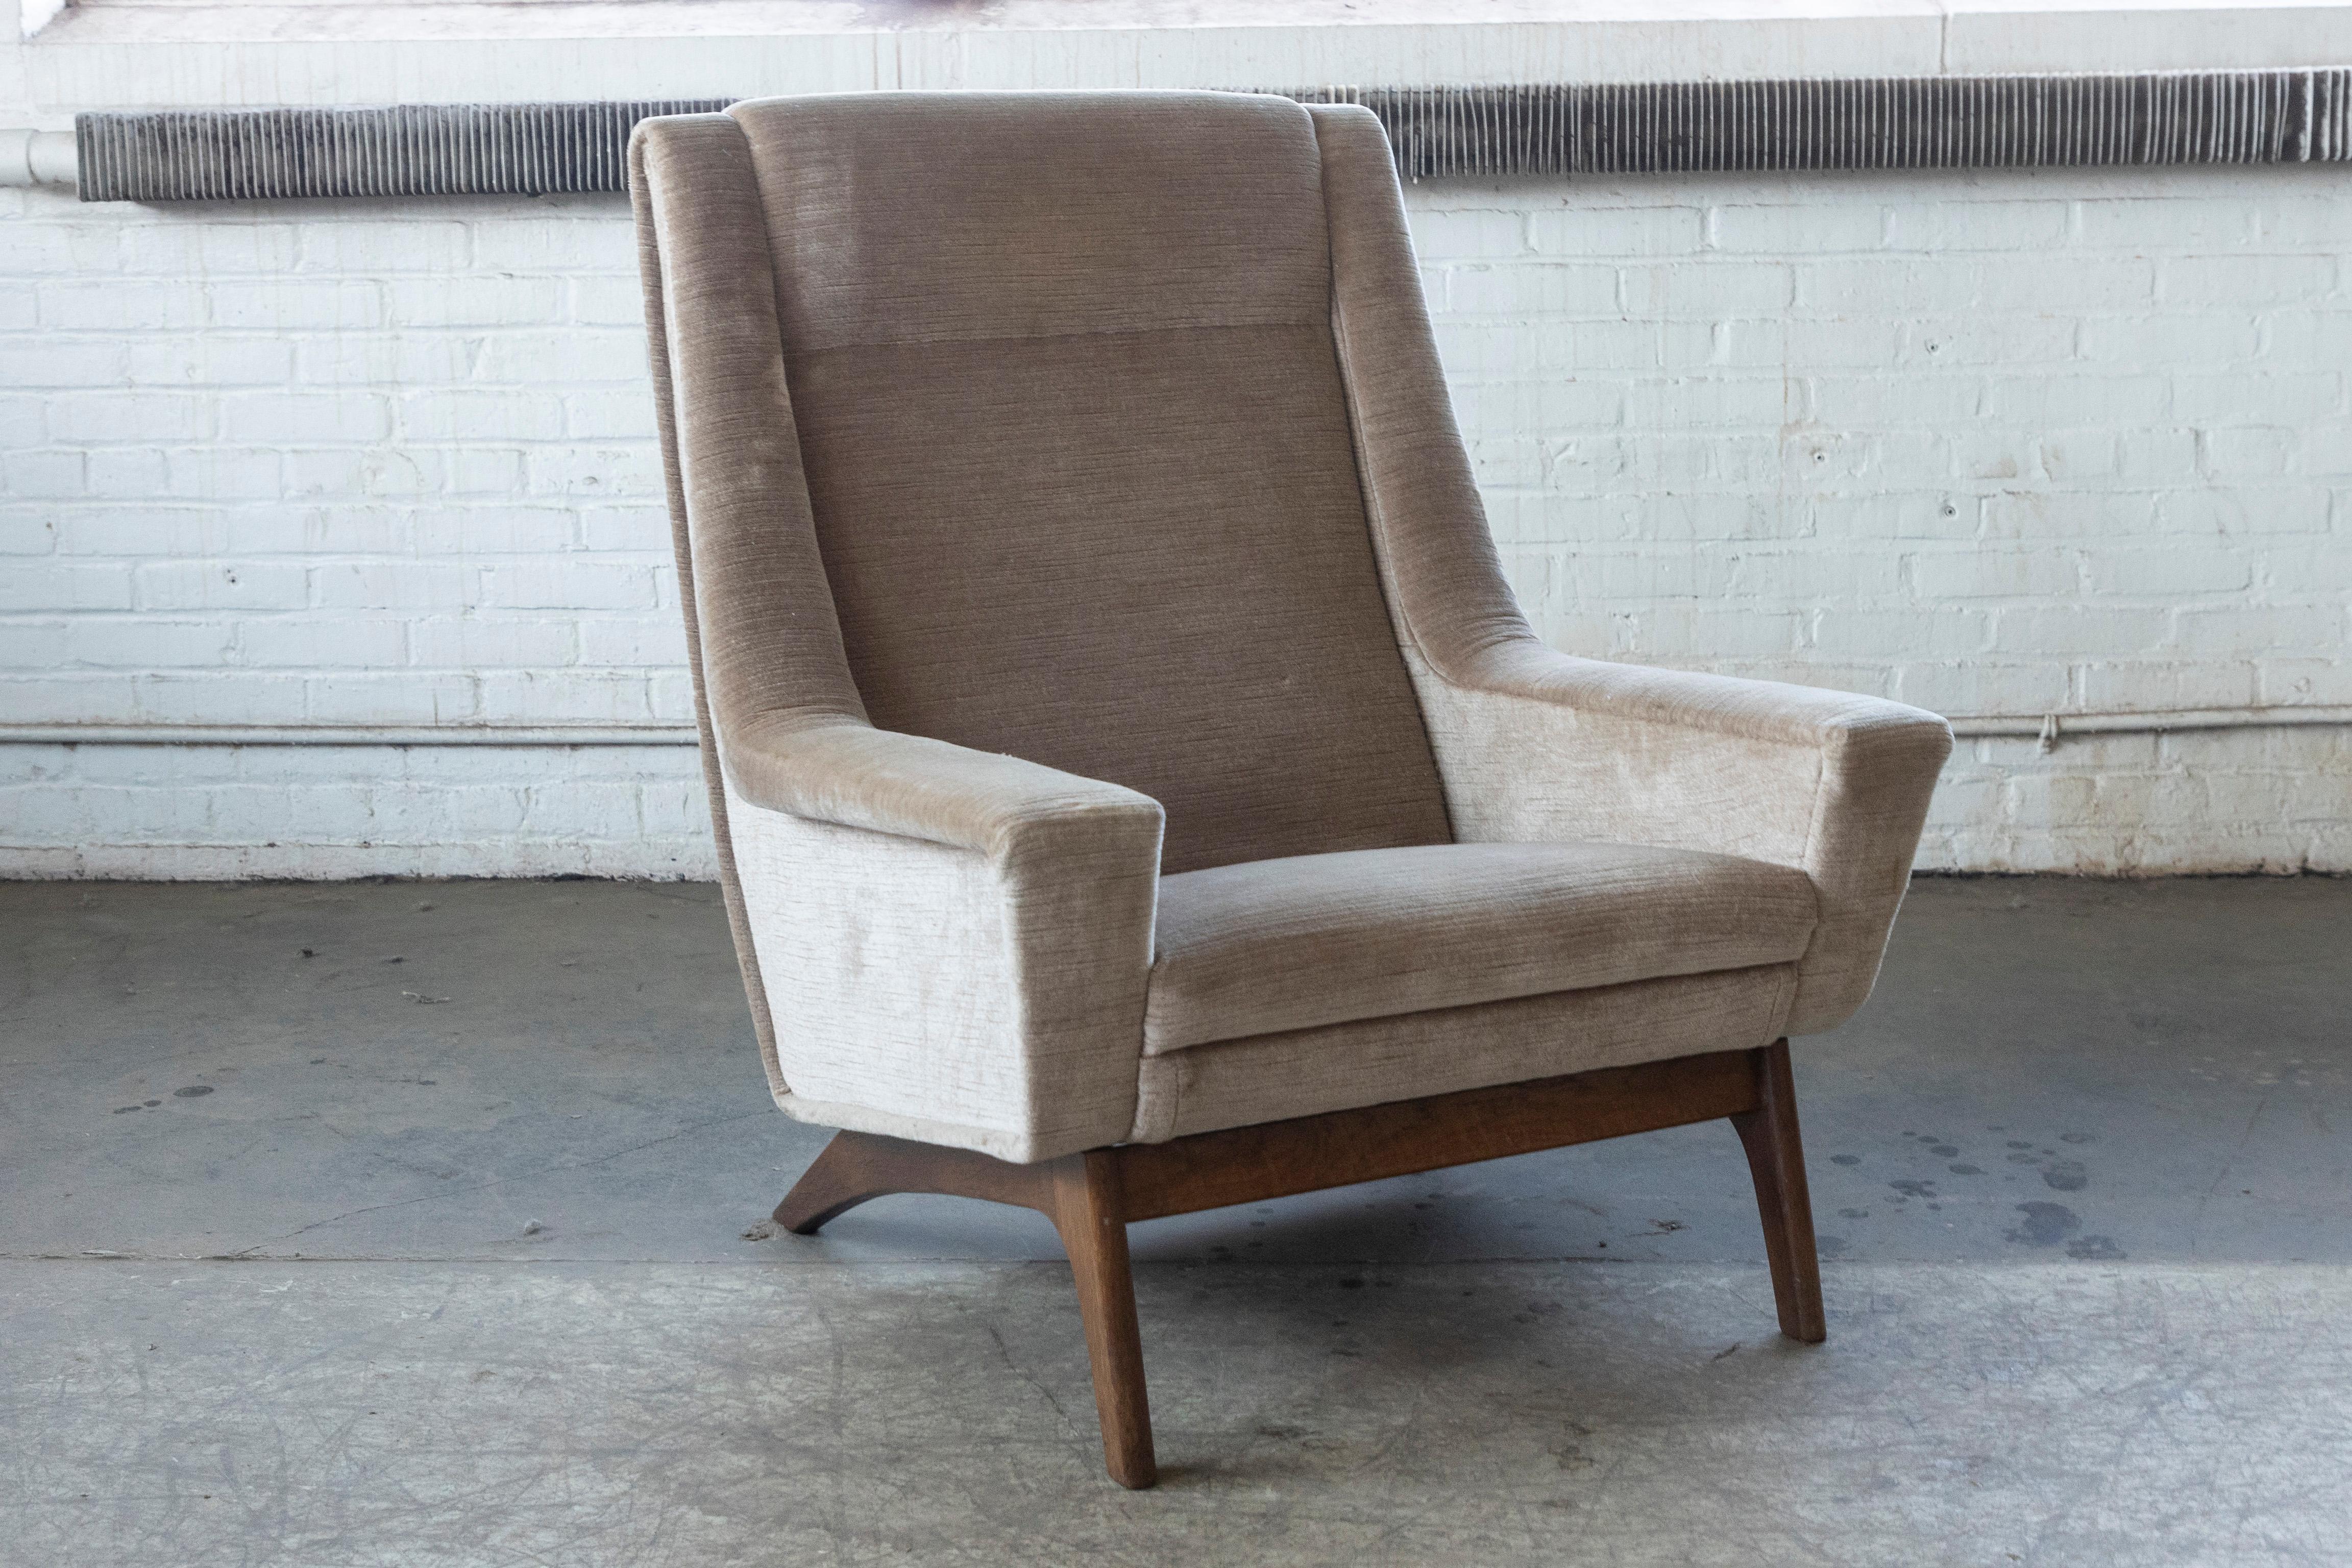 Classic and very elegant 1960's lounge chair attributed to Aage Christiansen to what appears to be a variation of his chair model Admiral by Erhardsen and Andersen. Very similar to some of the designs by Folke Ohlsson for Fritz Hansen. We love the